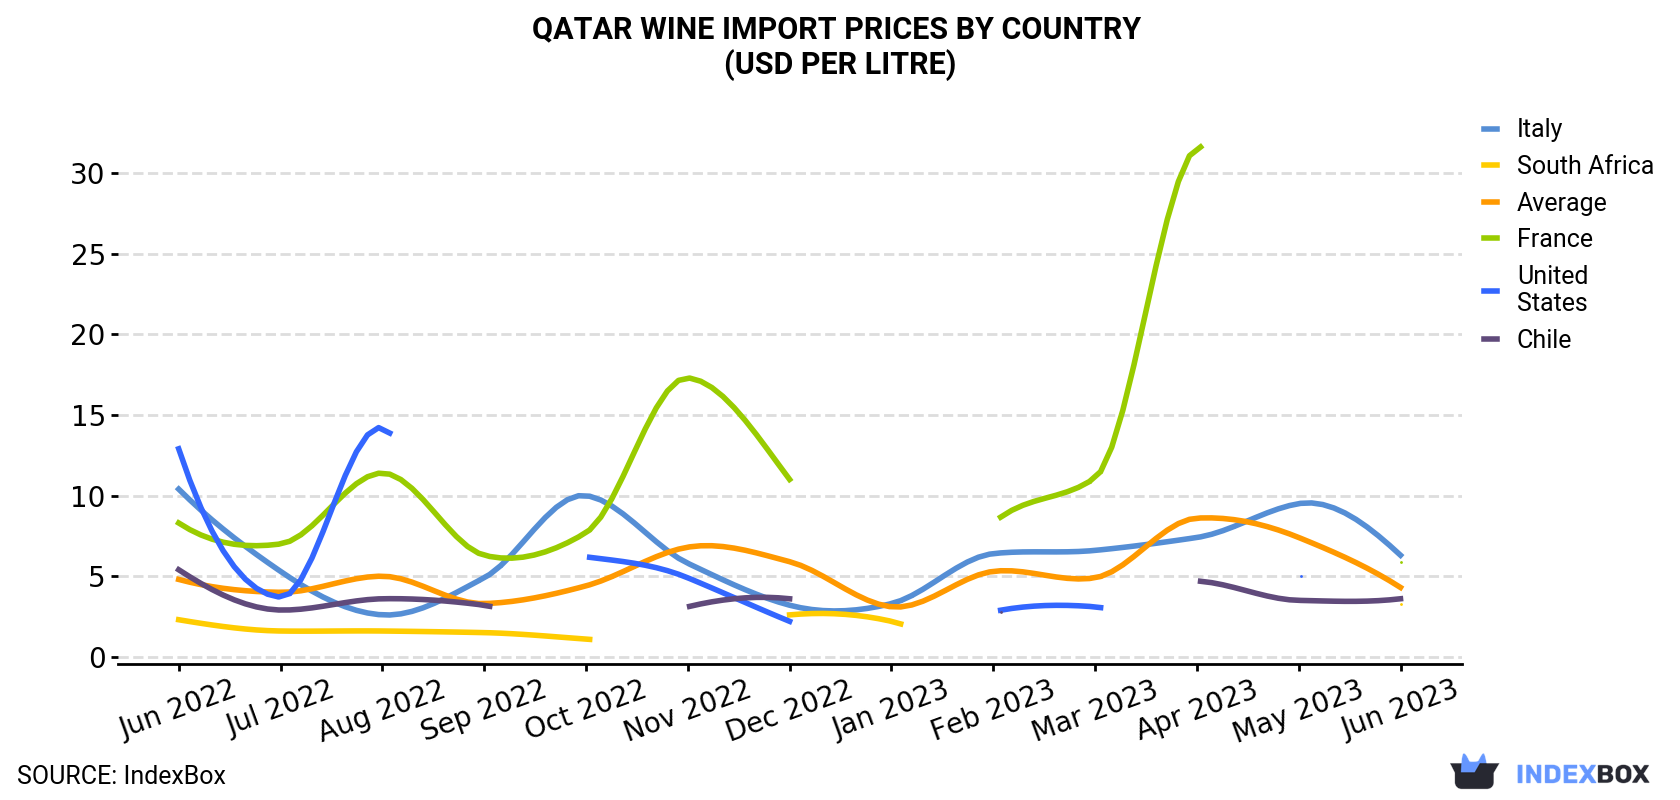 Qatar Wine Import Prices By Country (USD Per Litre)